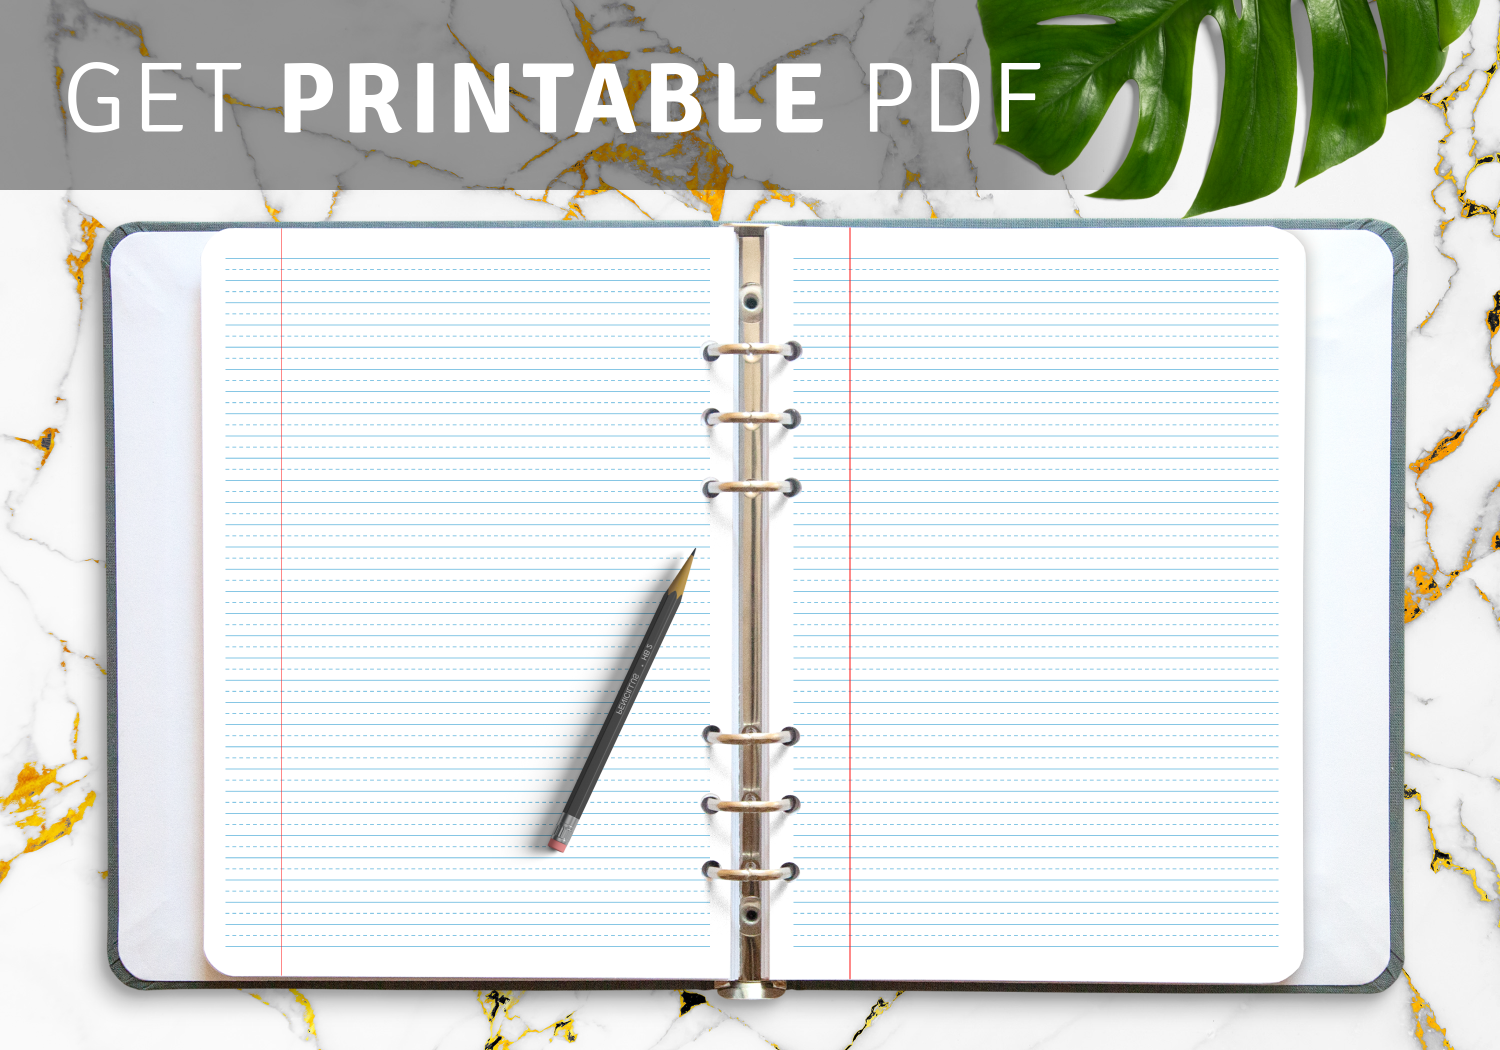 Printable Lined Paper wide ruled with dashed center guide line